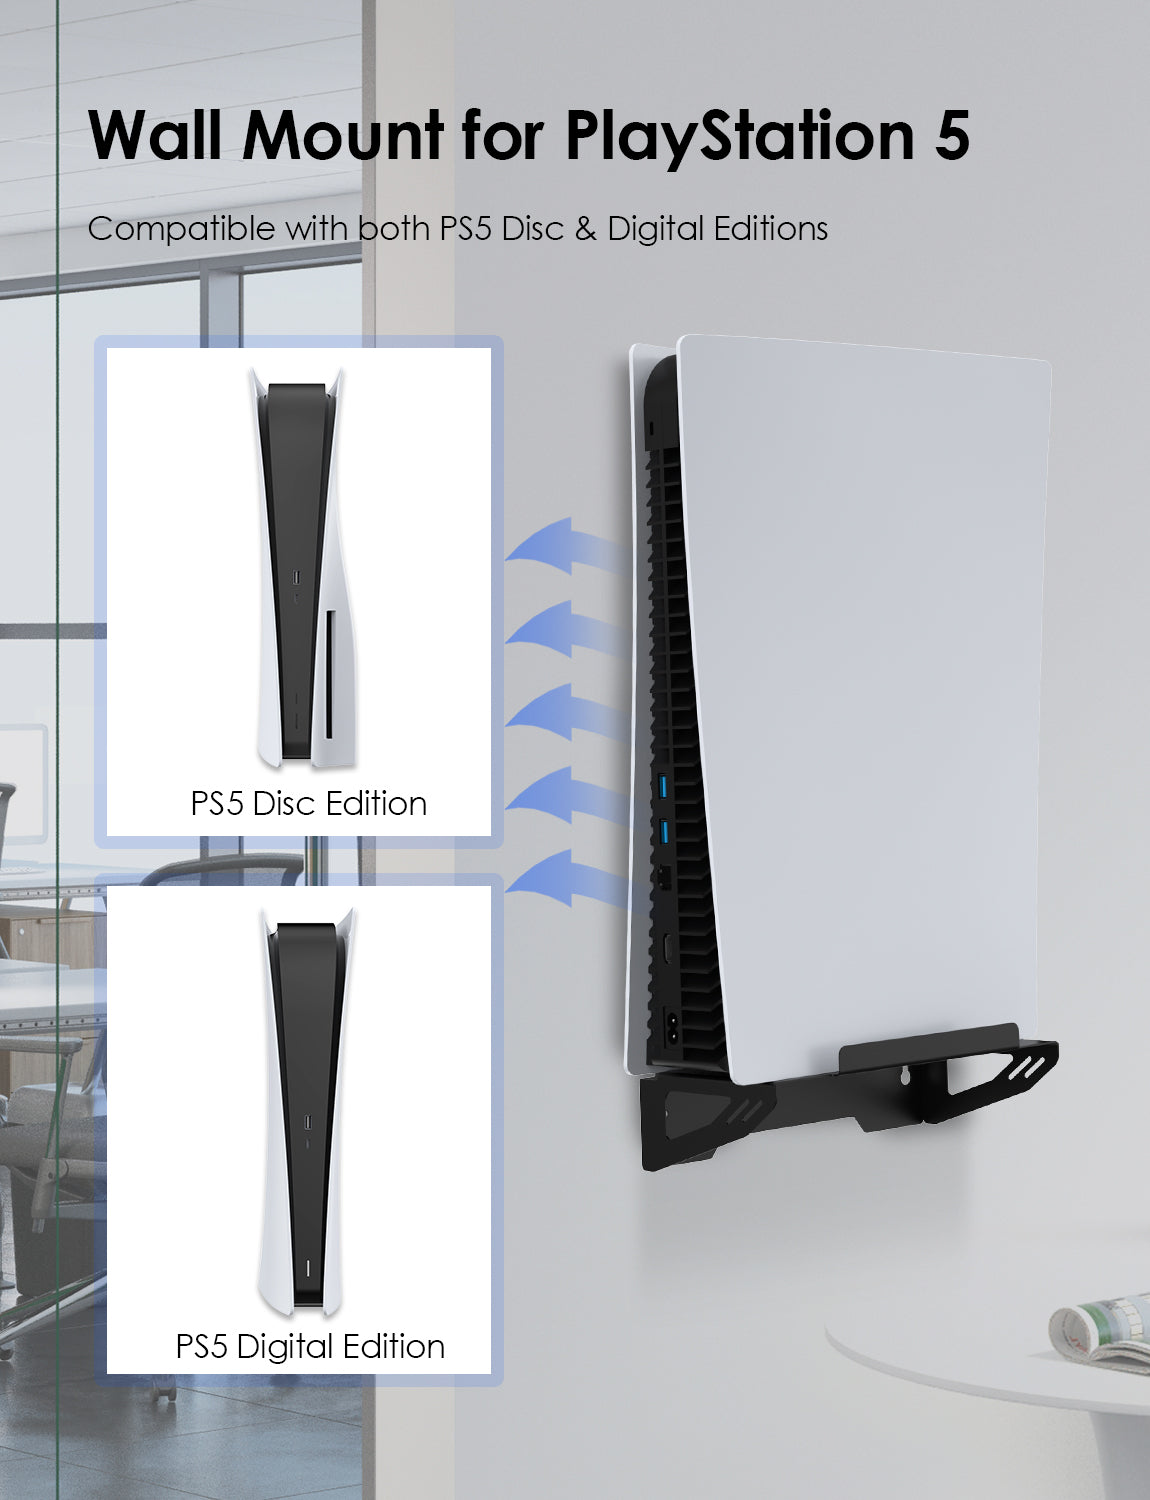 Wall mount compatible with PS5 disc and digital editions, featuring built-in cooling function.